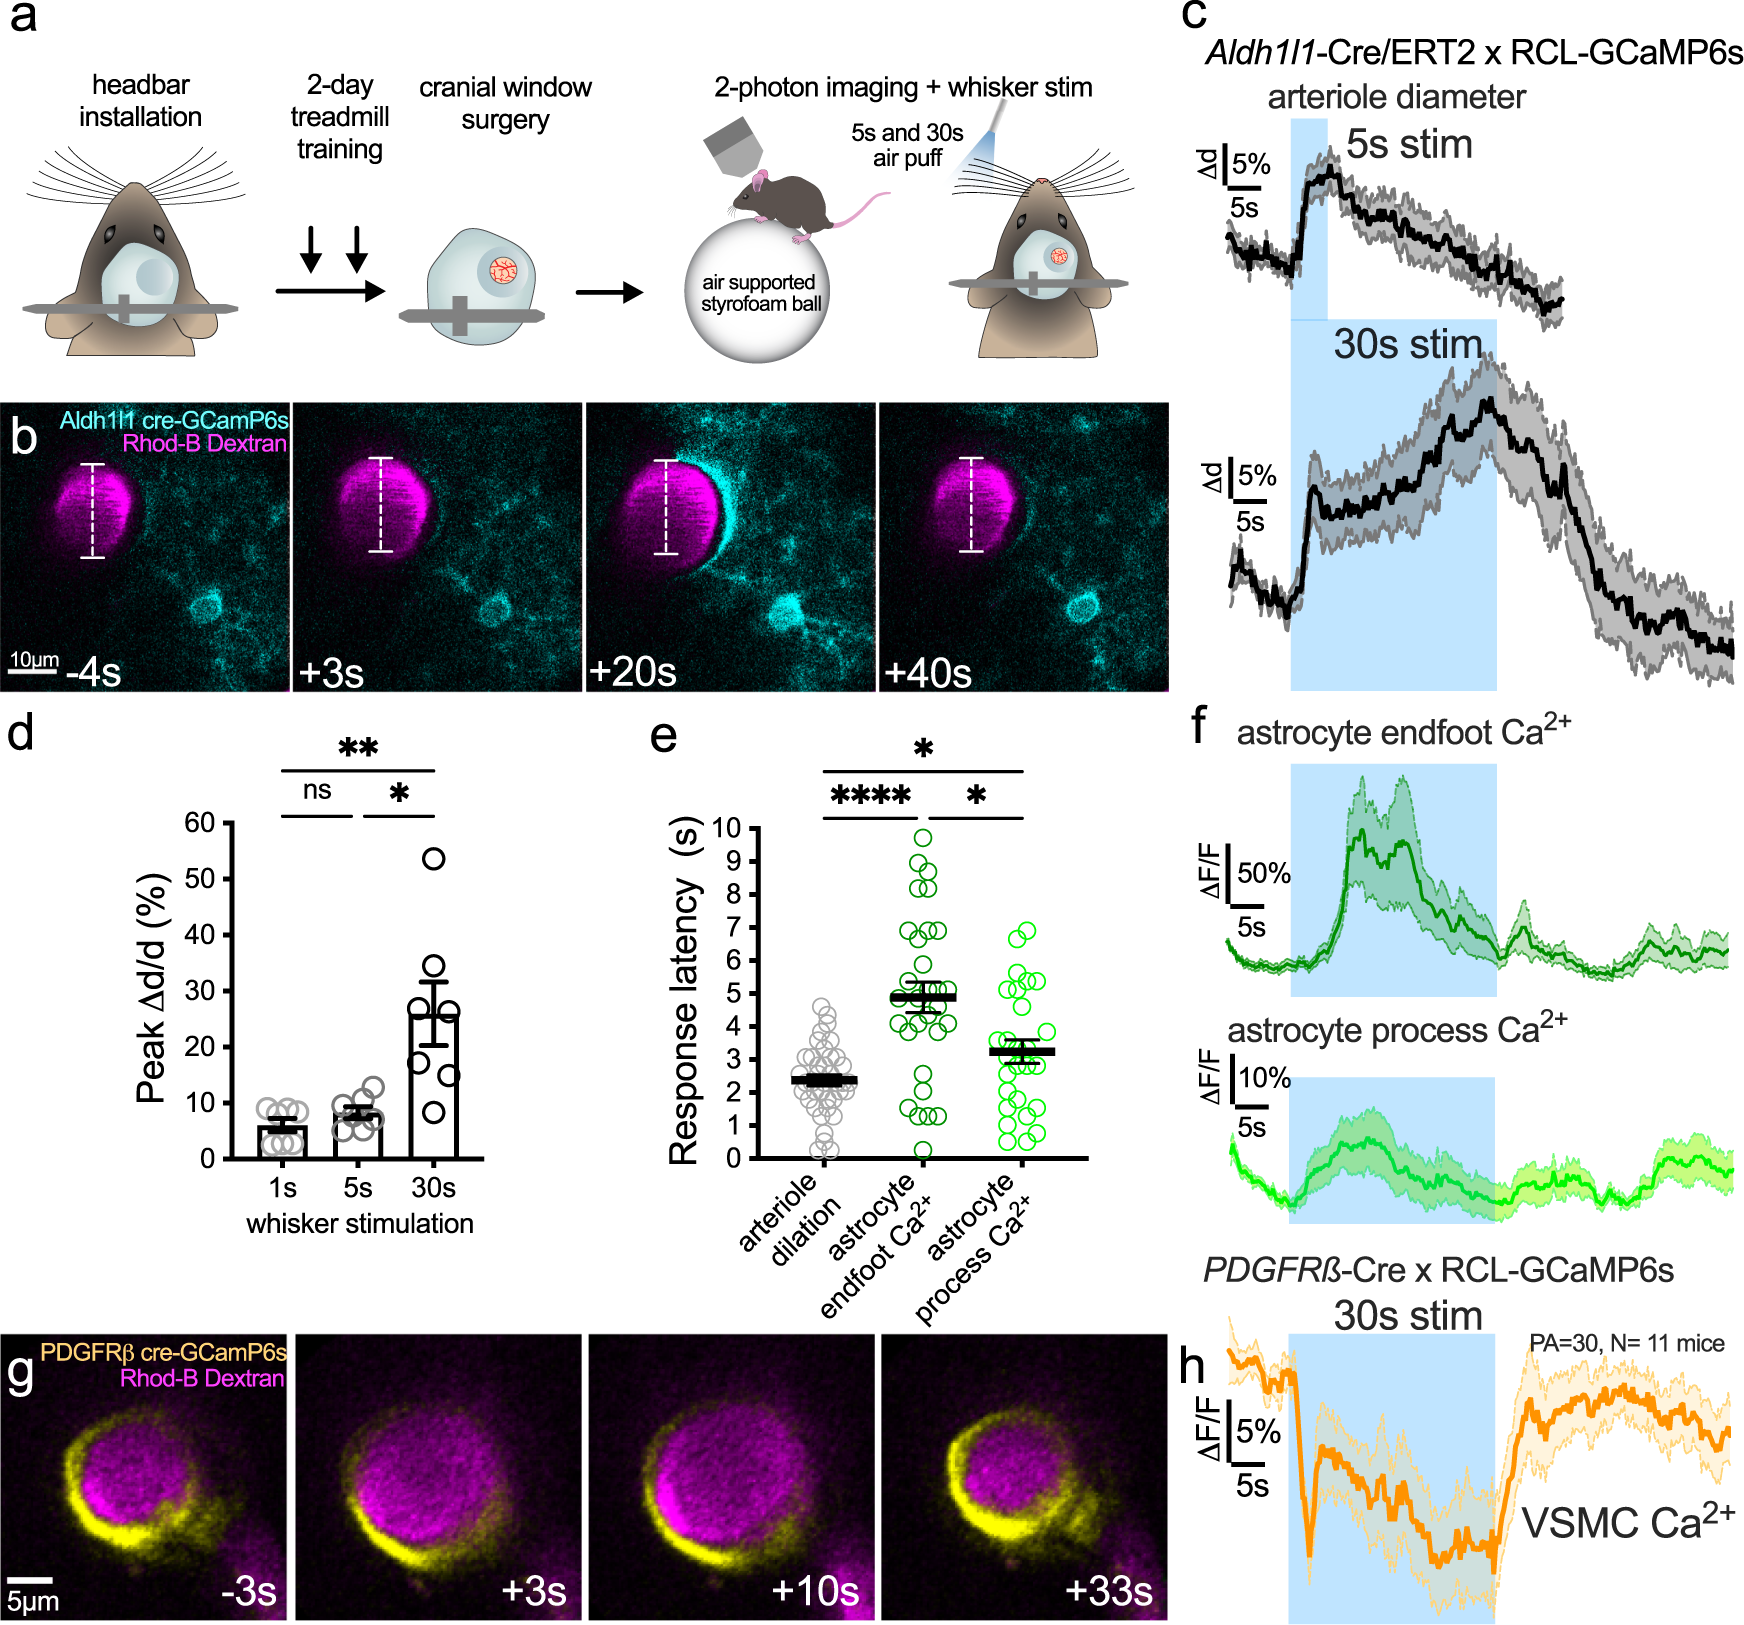 Clamping astrocyte Ca 2+ in vivo with CalEx impairs vasomotion (A)